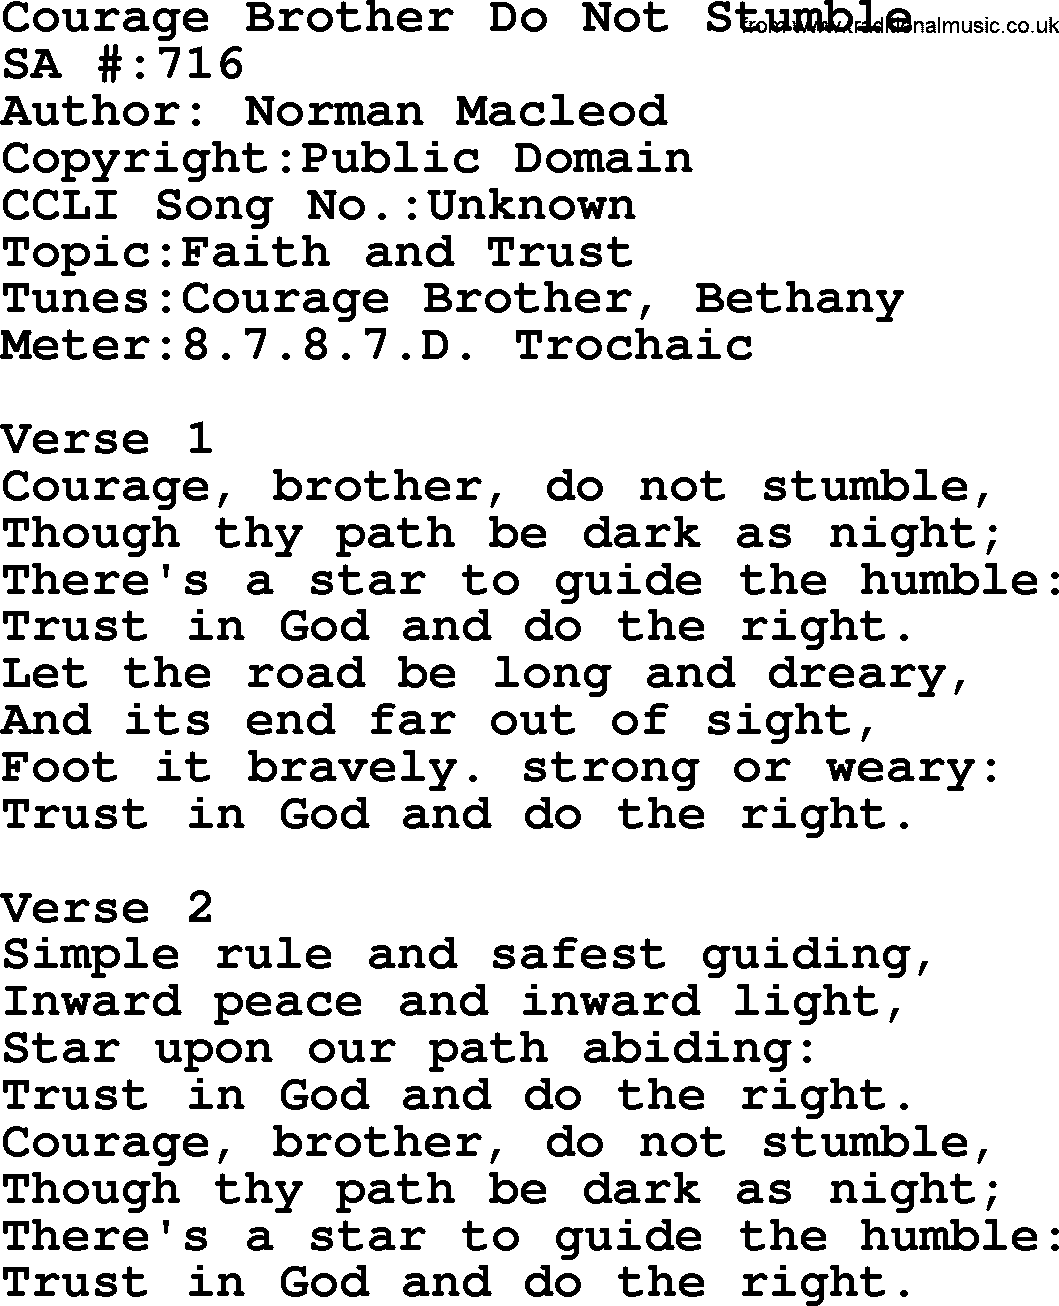 Salvation Army Hymnal, title: Courage Brother Do Not Stumble, with lyrics and PDF,